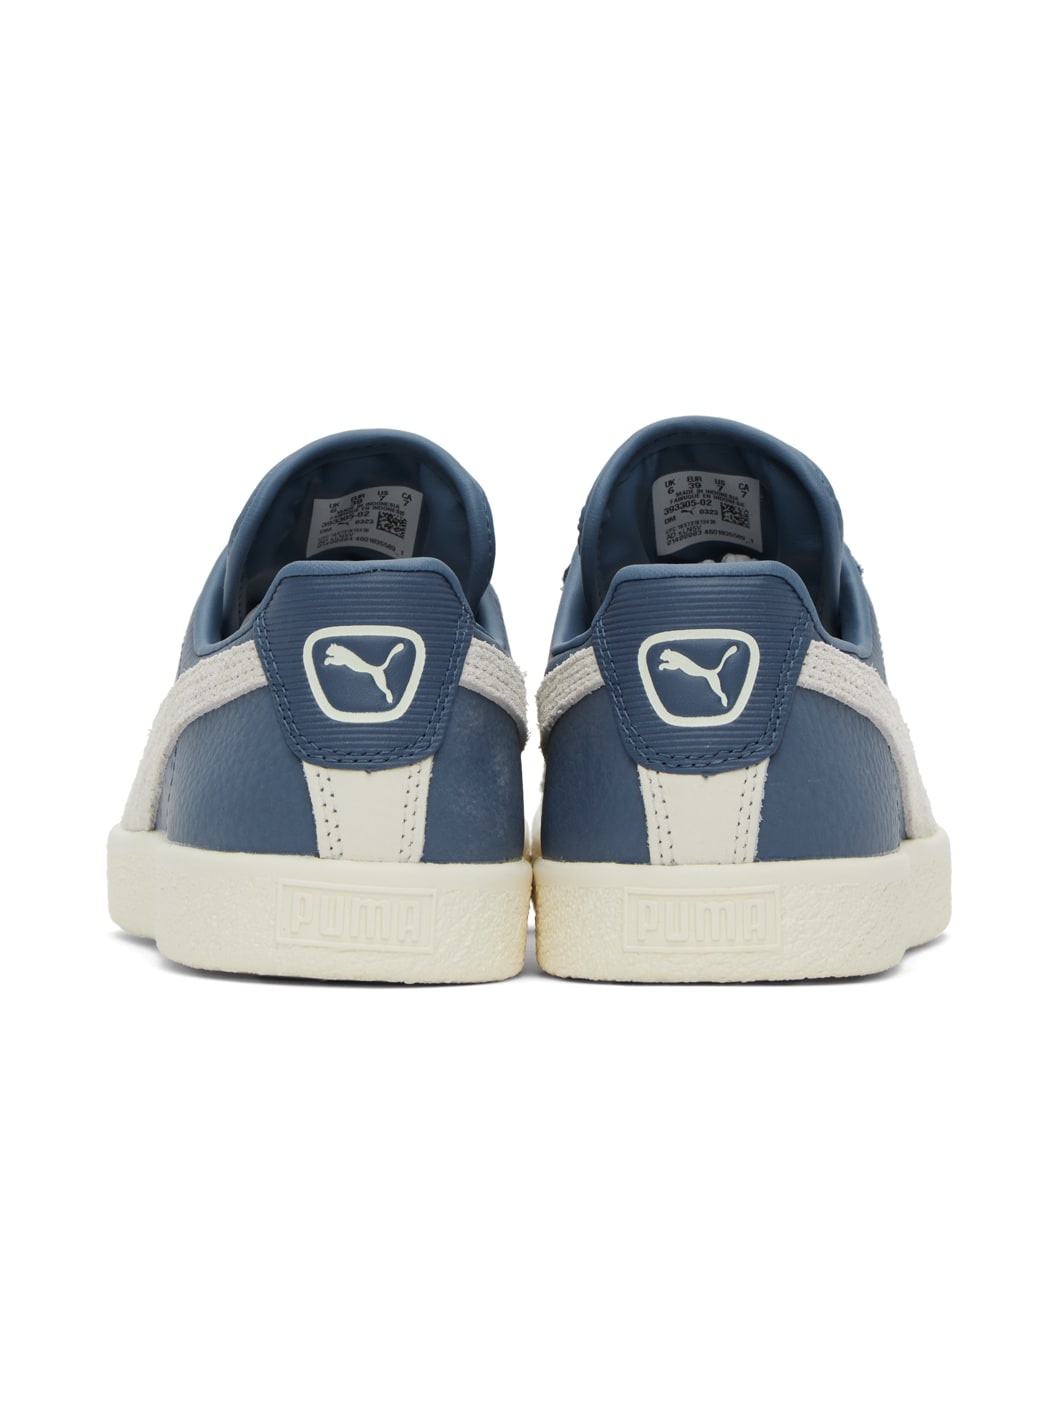 Blue Puma Edition Clyde Q-3 Sneakers - 2